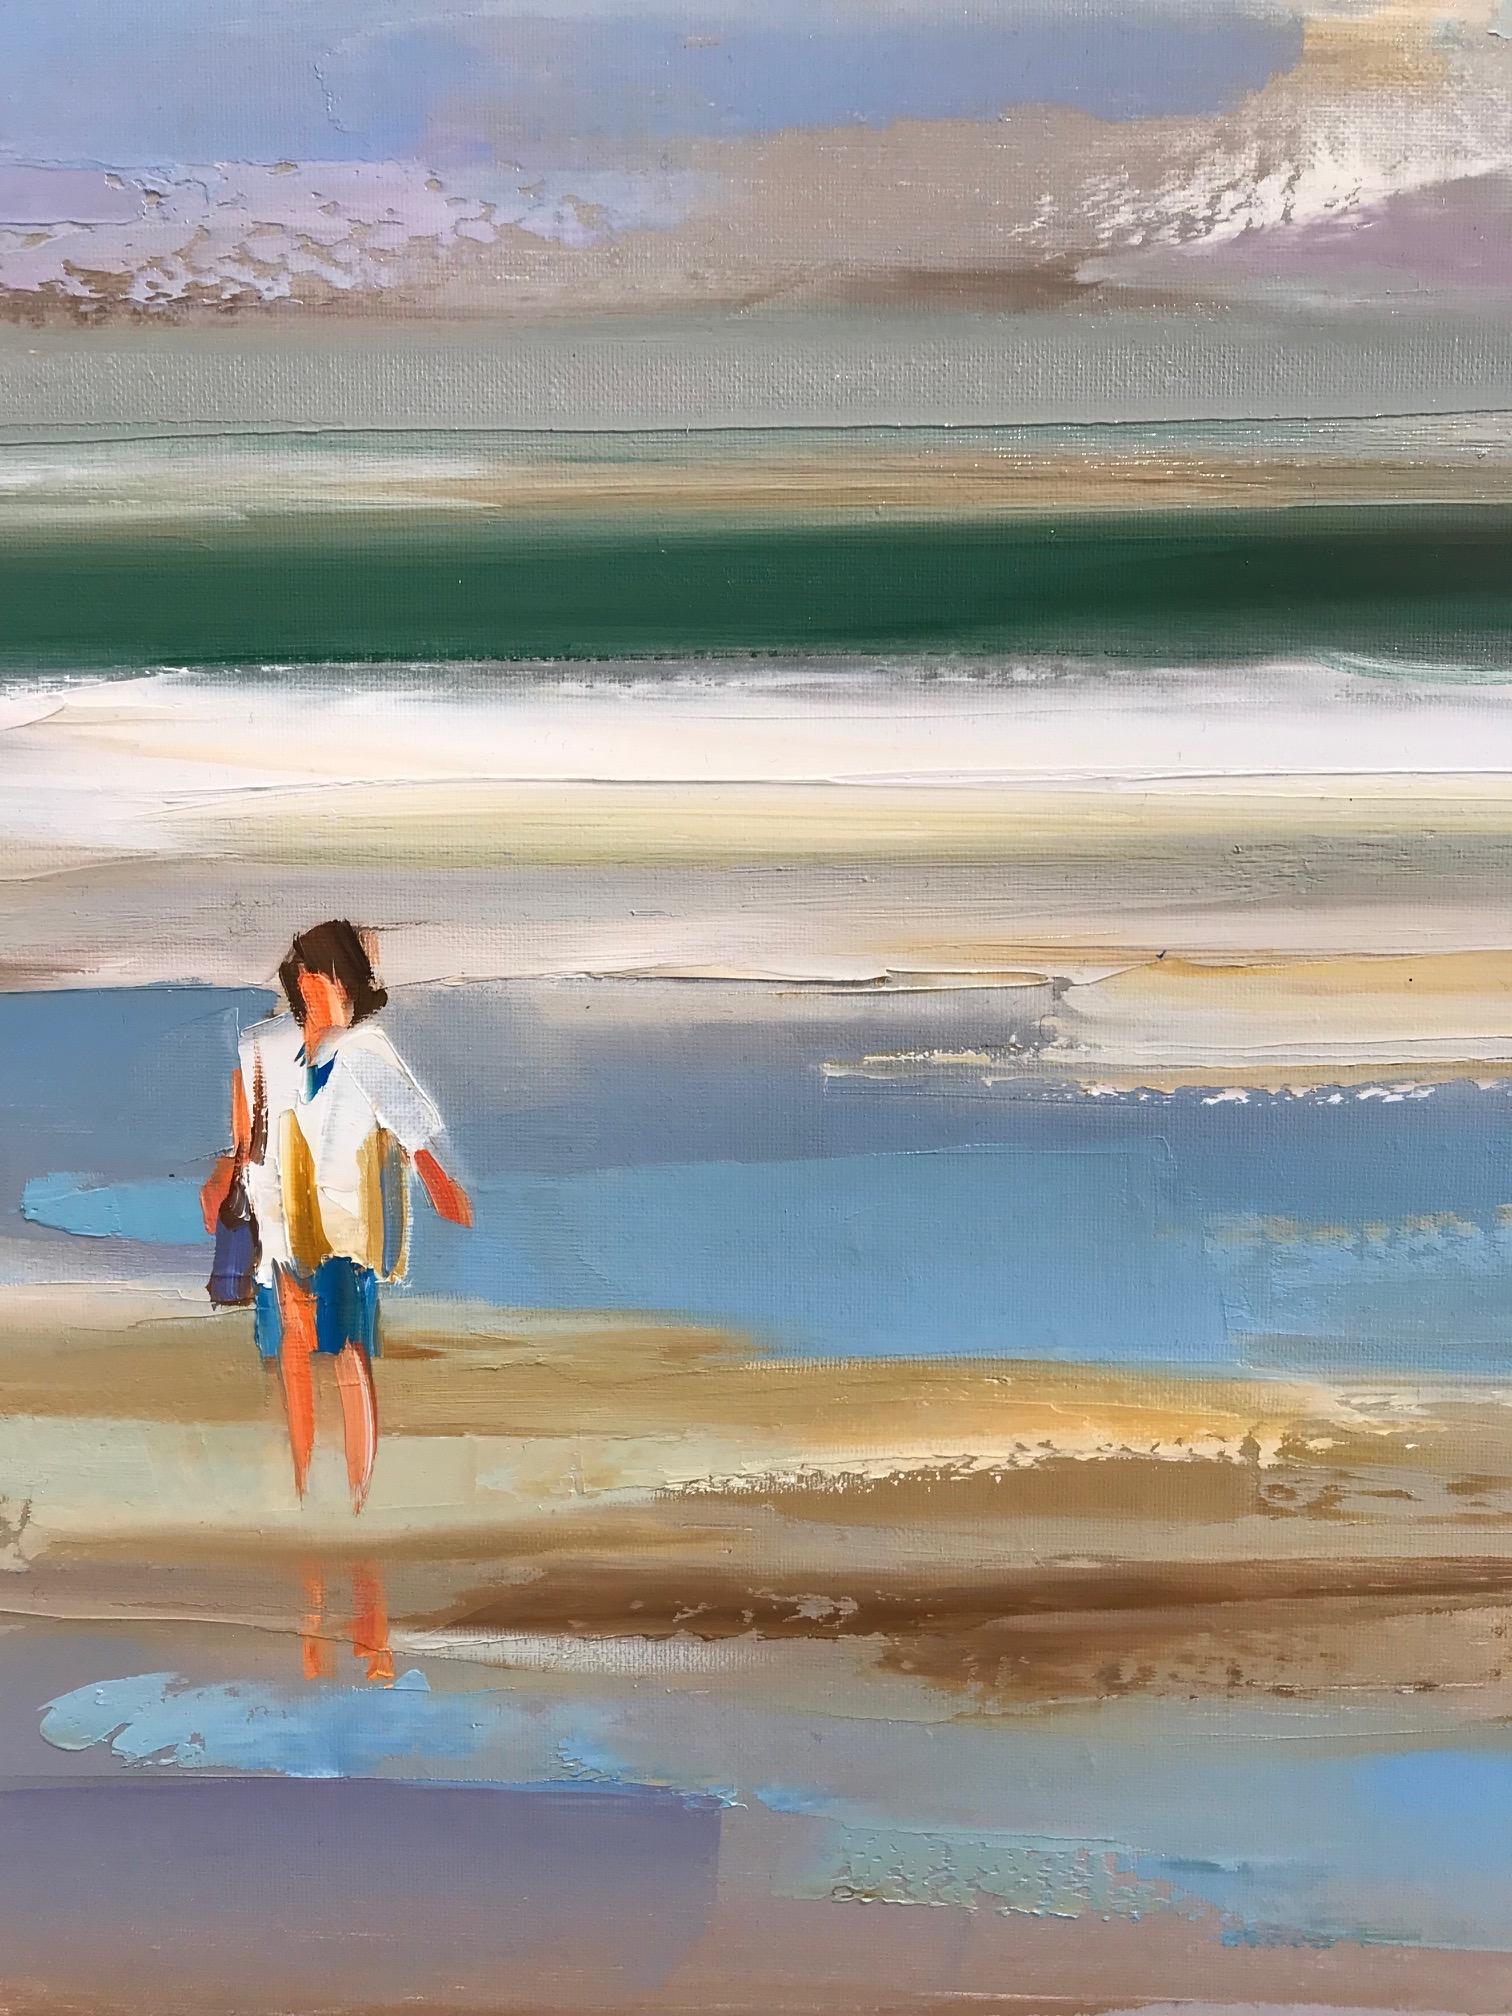 The Polish artist Ewa Rzeznik reflects reality in her colorful paintings: Fishermen along the French coast, families walking towards the Mon Saint-Michel, children playing in the surf. The bright use of color, almost luminous, attracts the